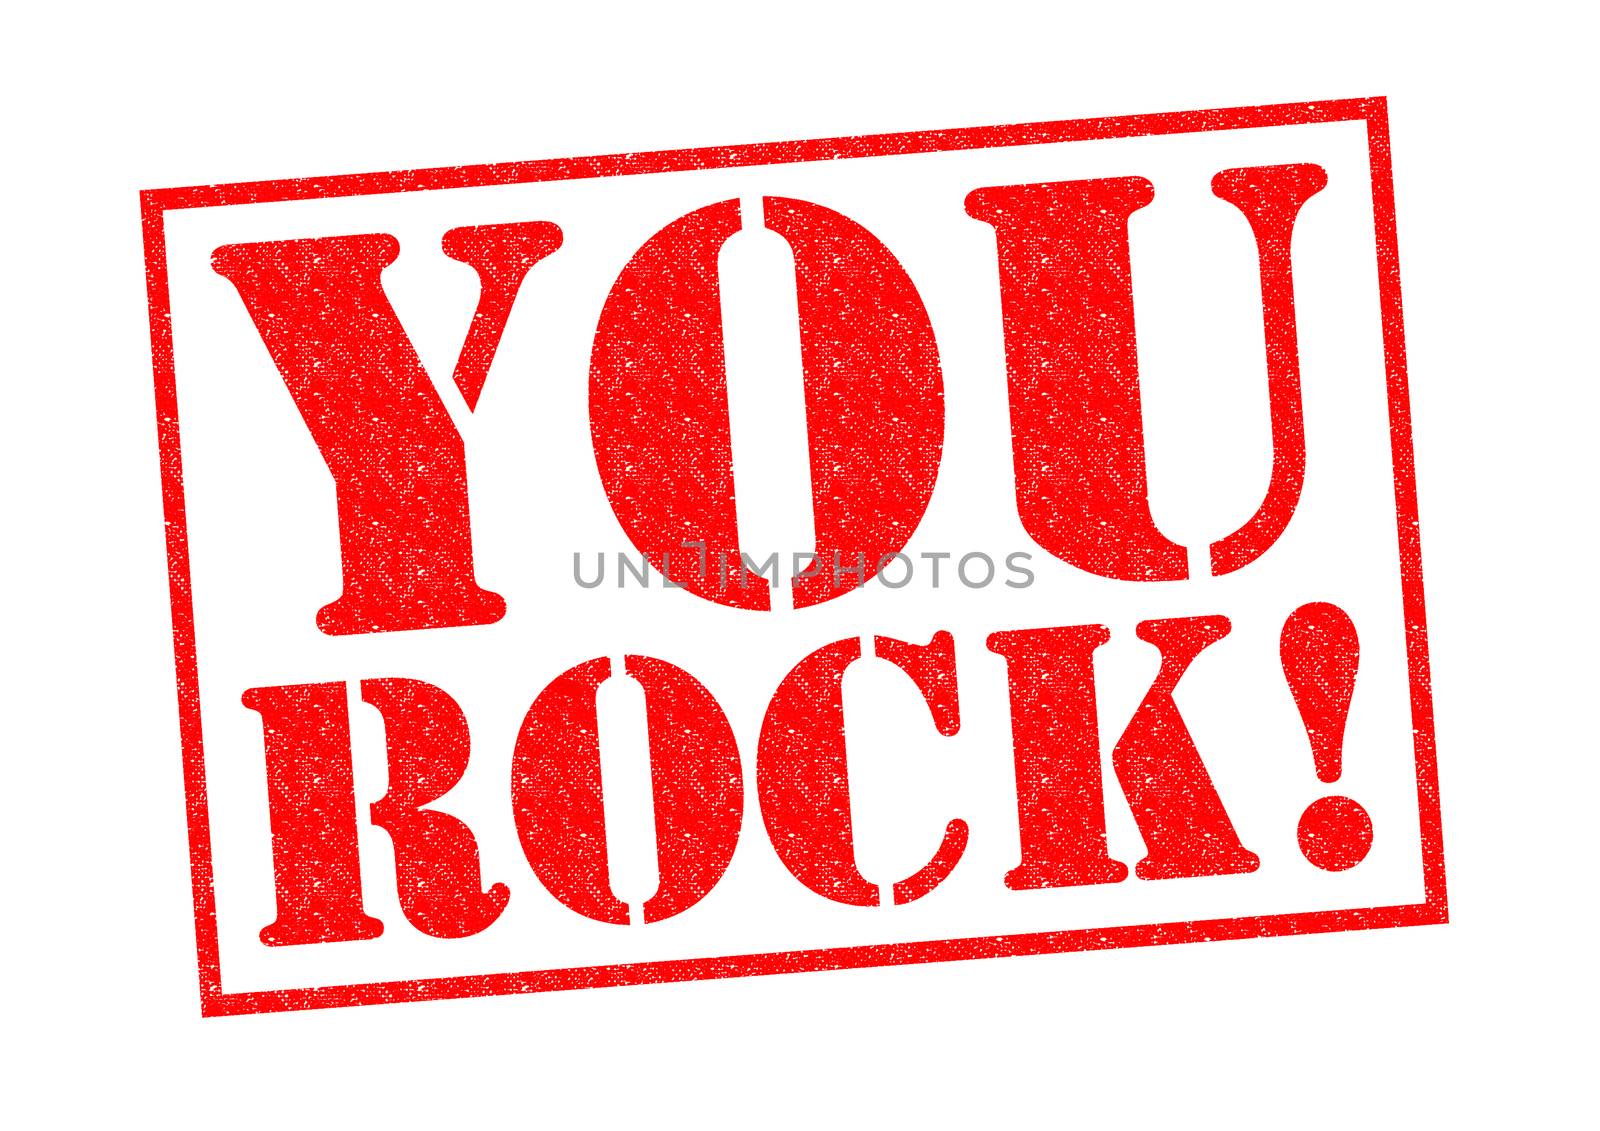 YOU ROCK! red Rubber Stamp over a white background.